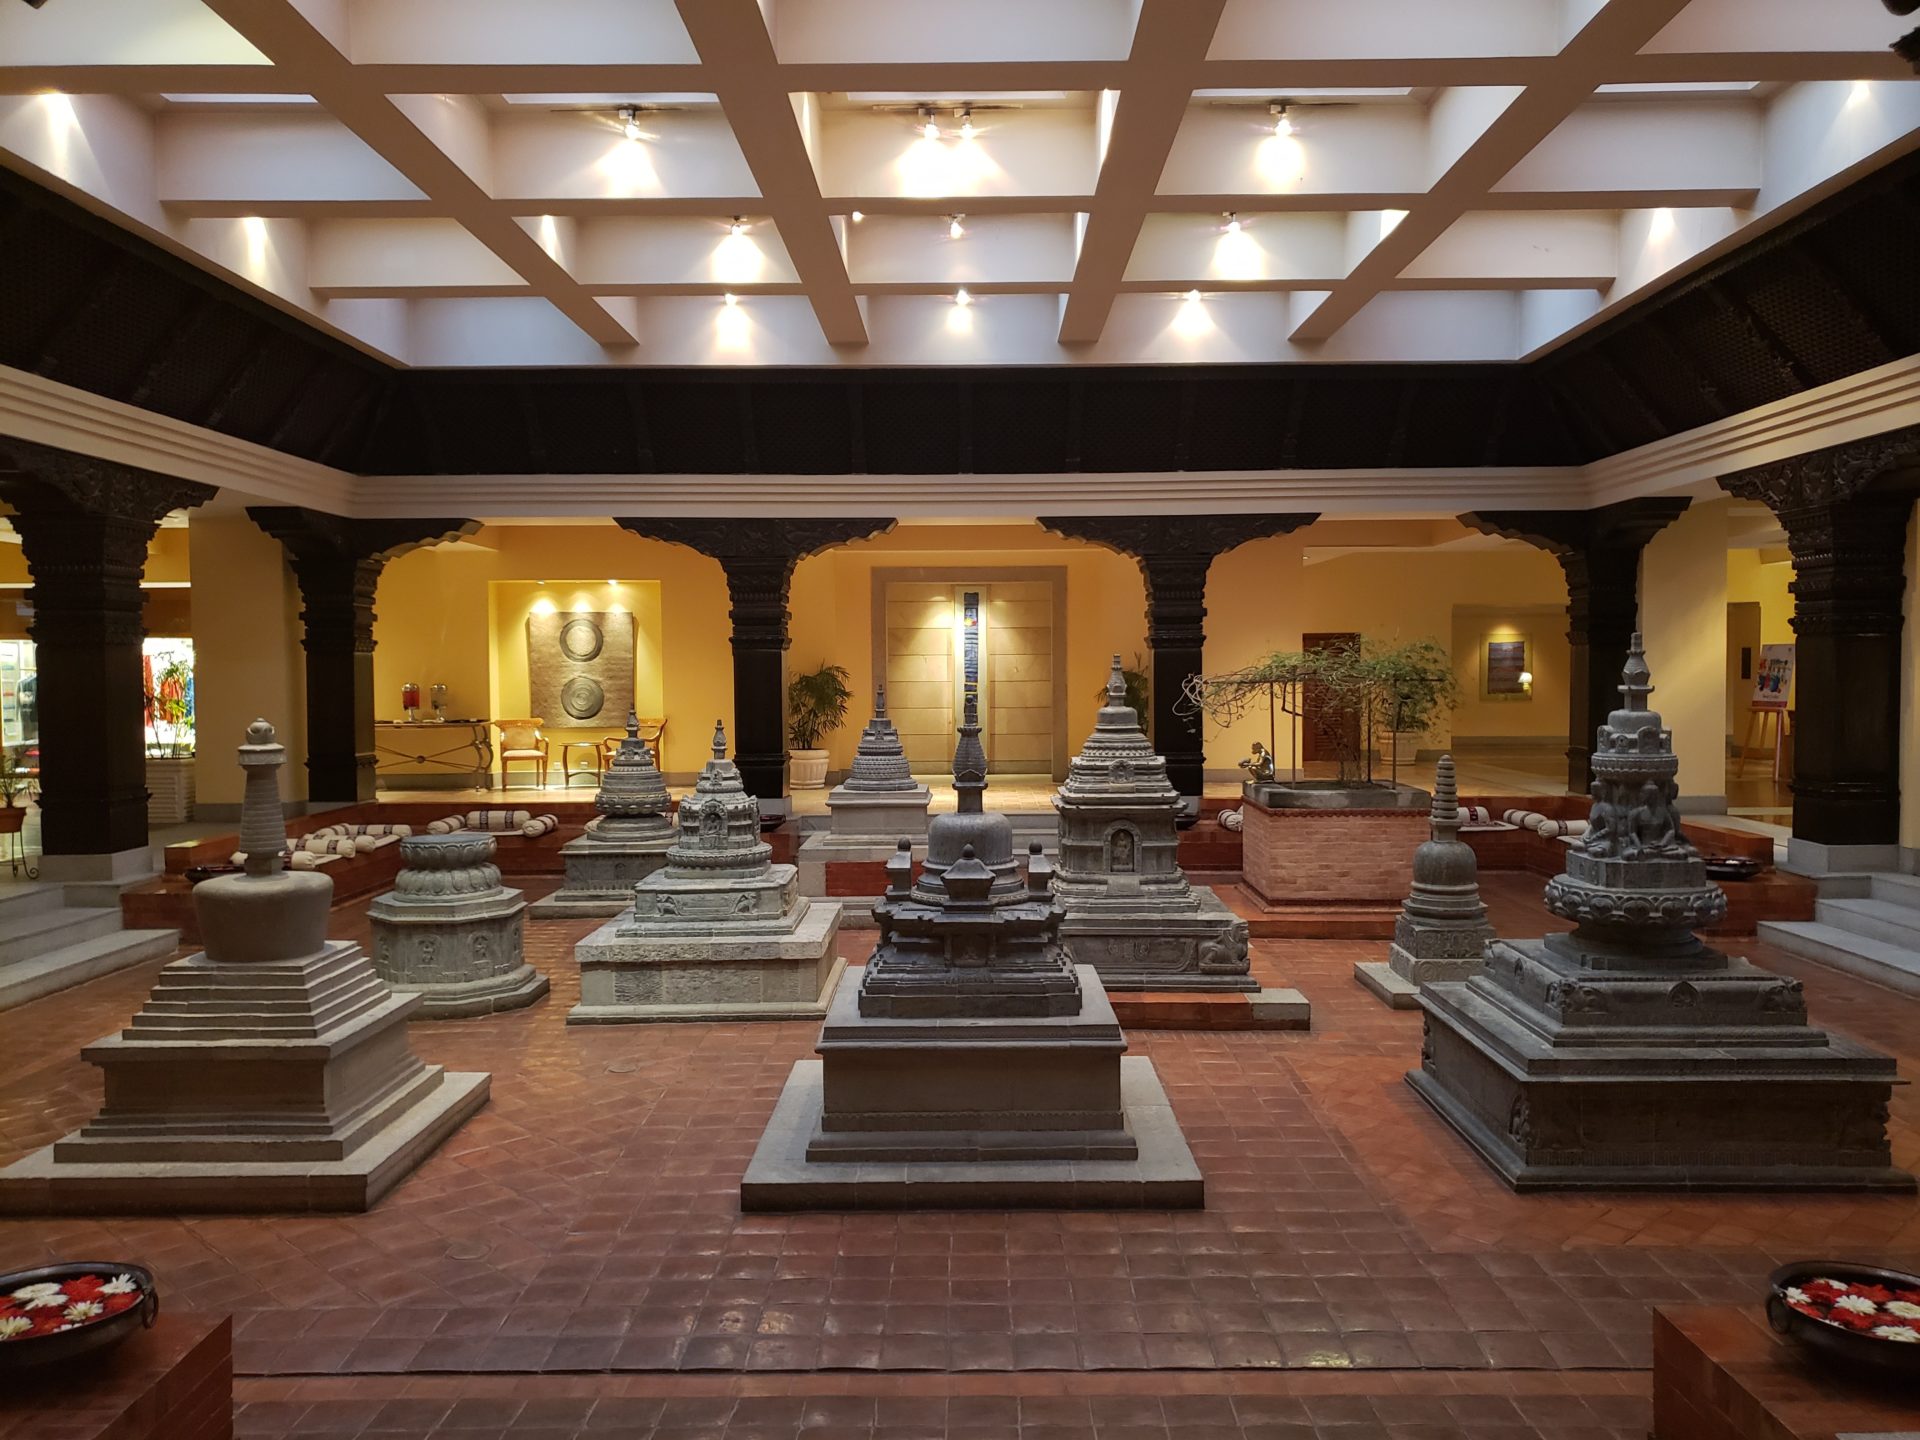 a large room with many small statues